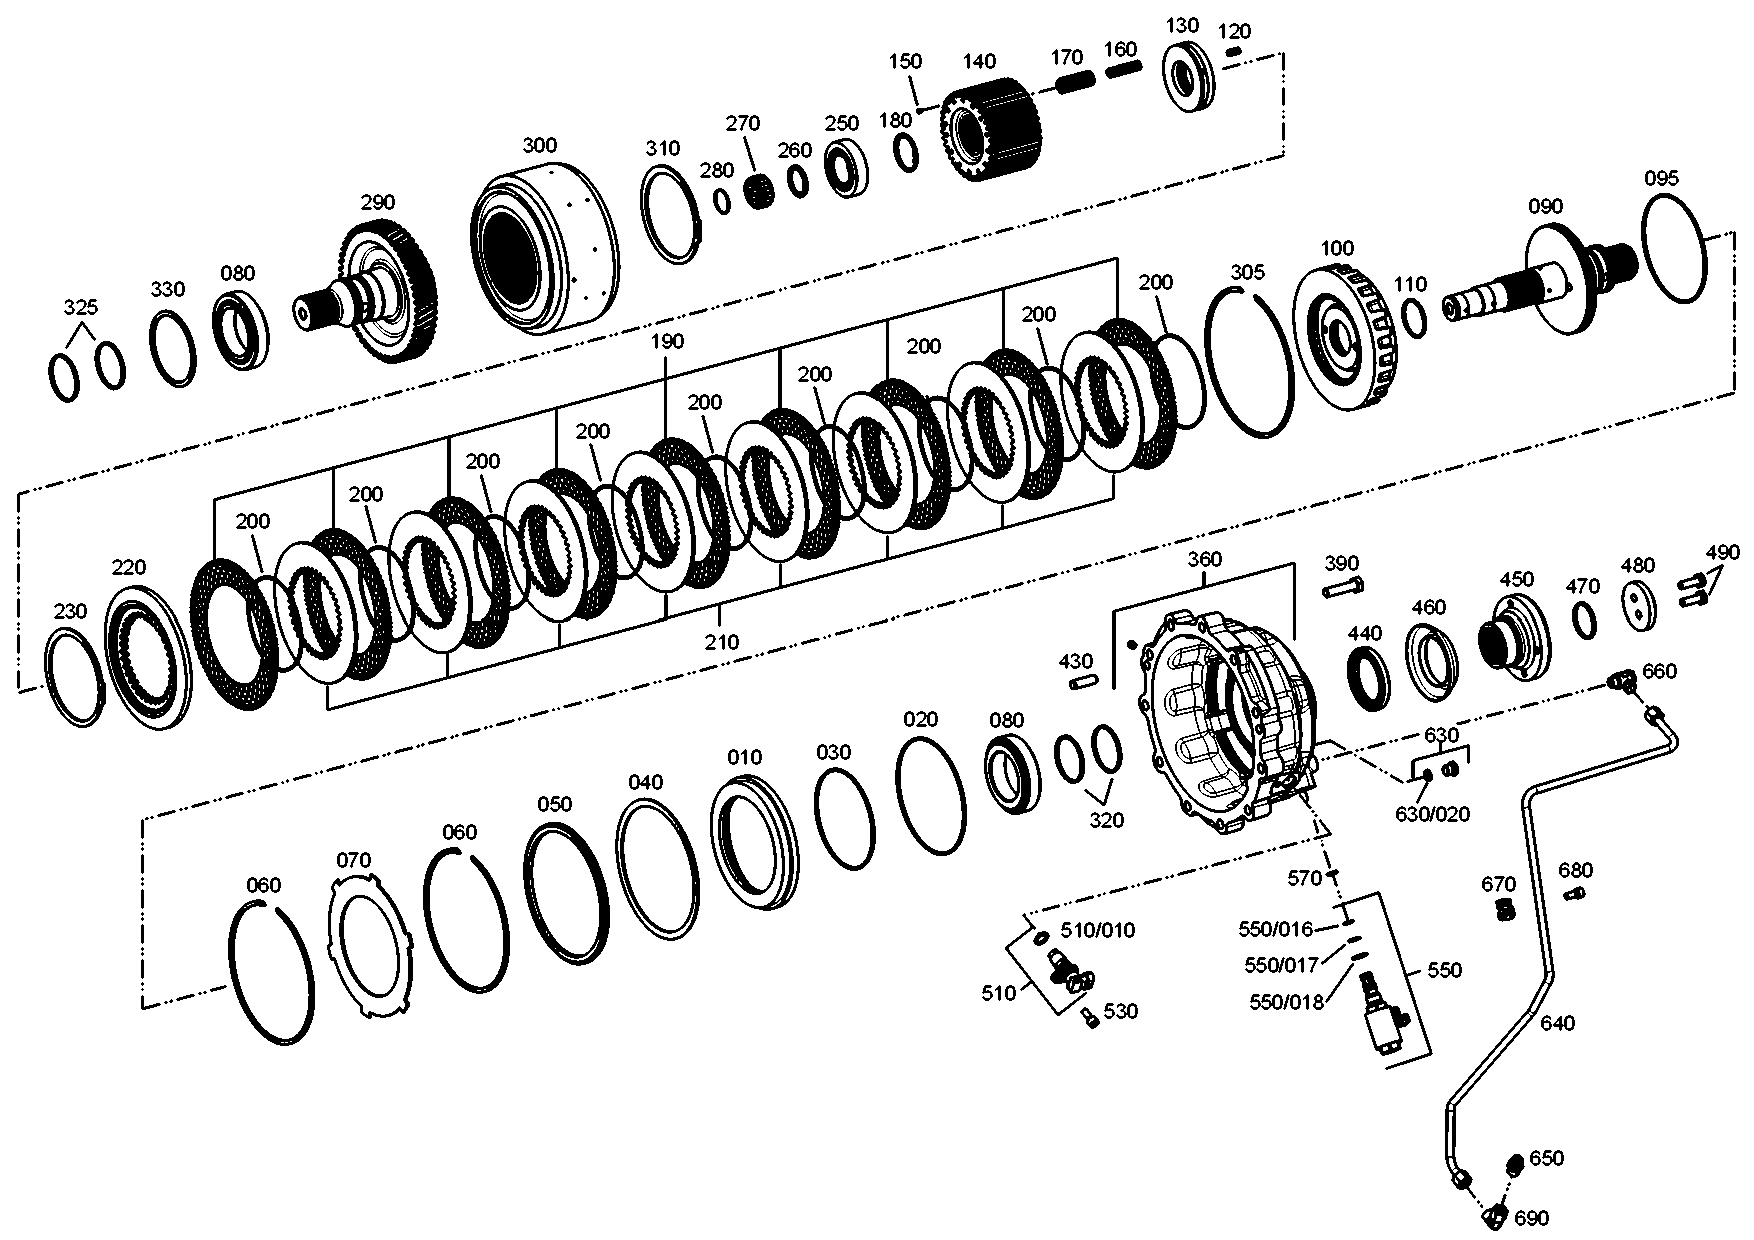 drawing for CLAAS CSE 05986911 - SOLENOID VALVE (figure 2)